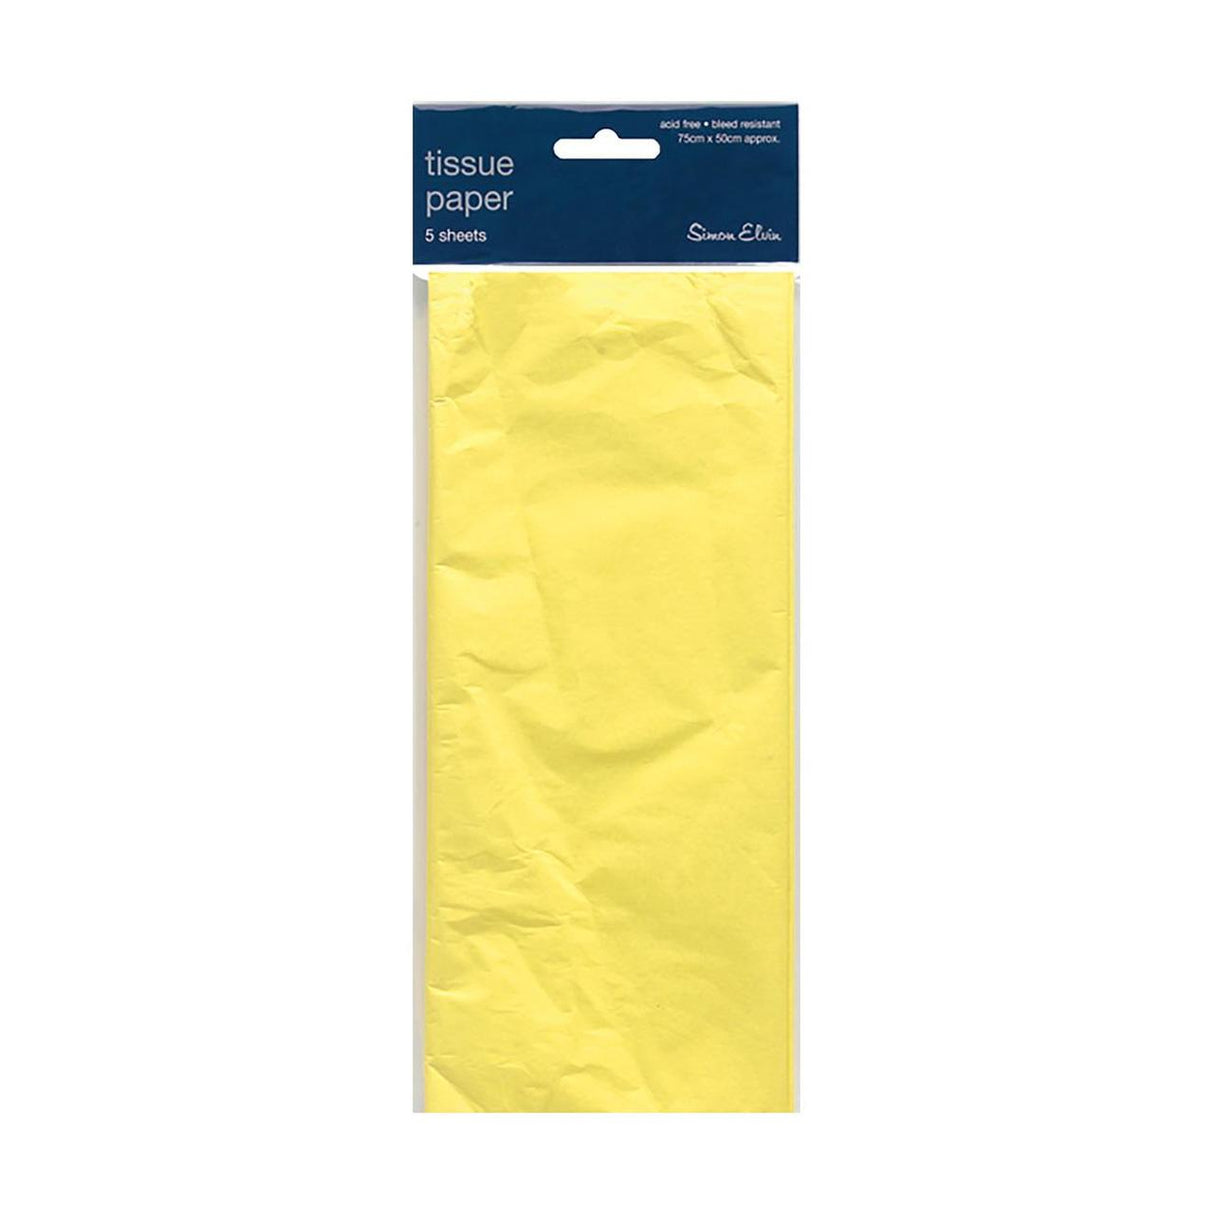 5 Sheets of Yellow Tissue Paper